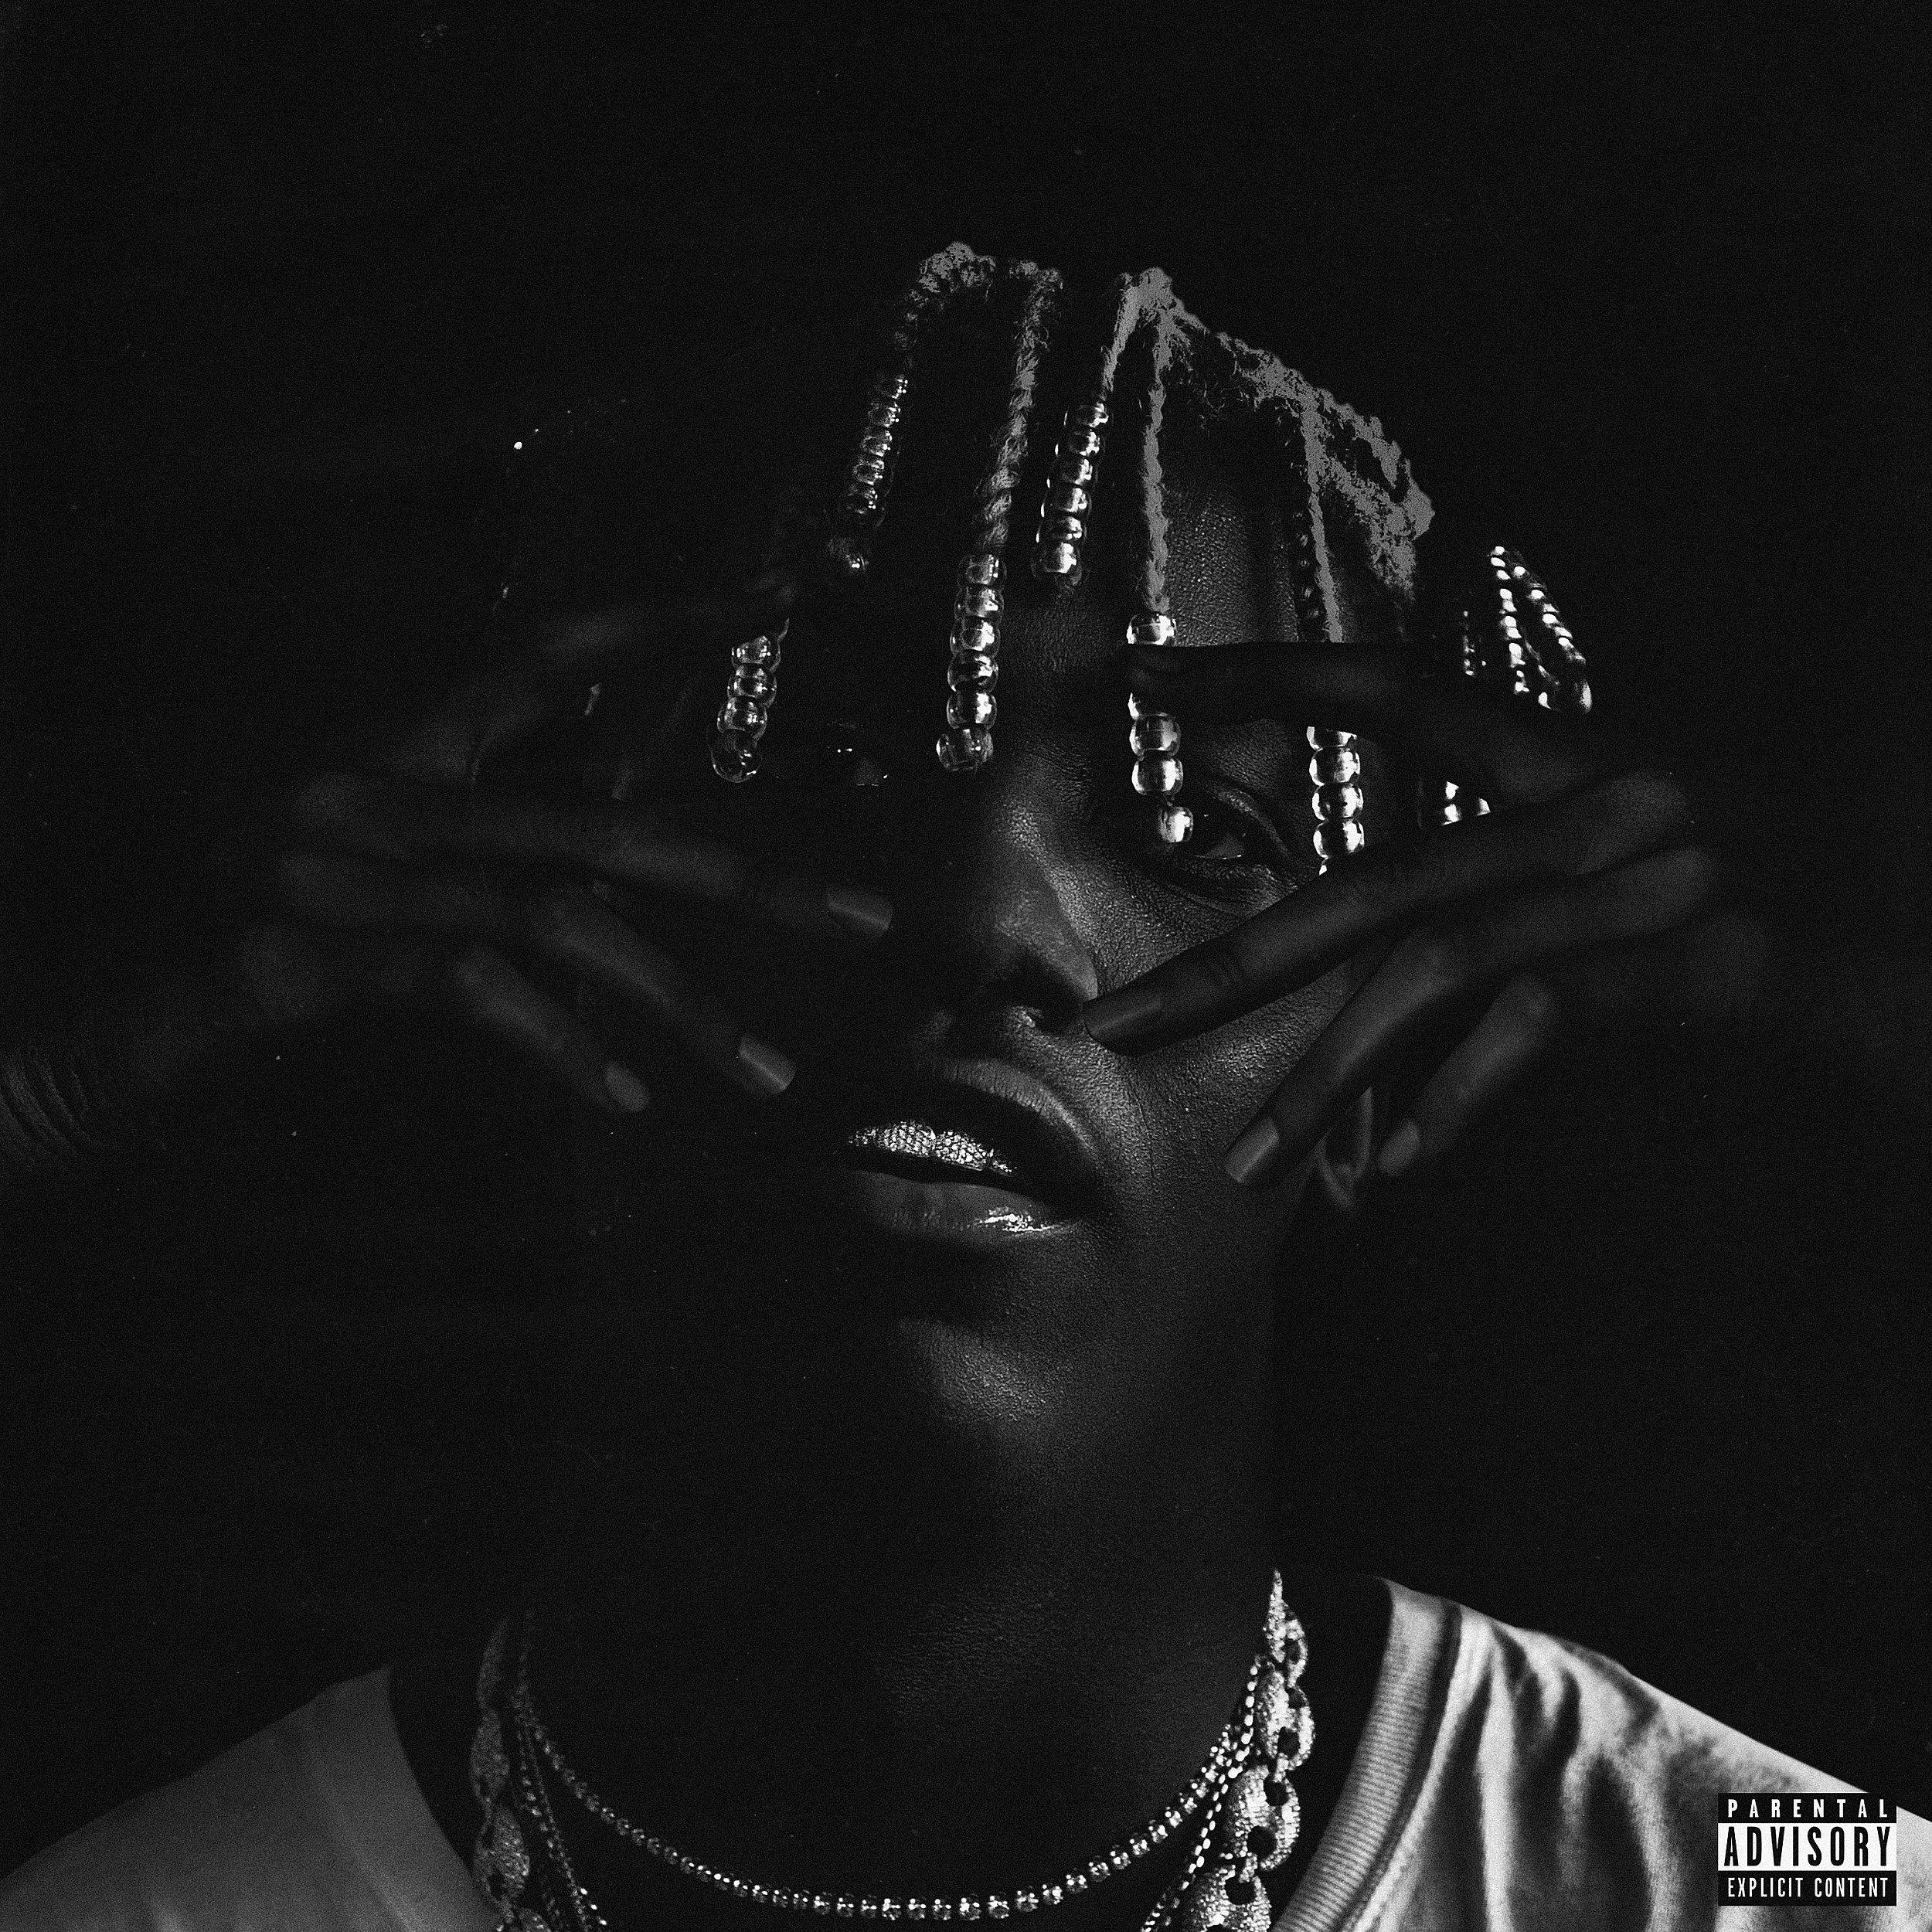 Lil Yachty Drops New Songs Peek A Boo With Migos and 2500x2500